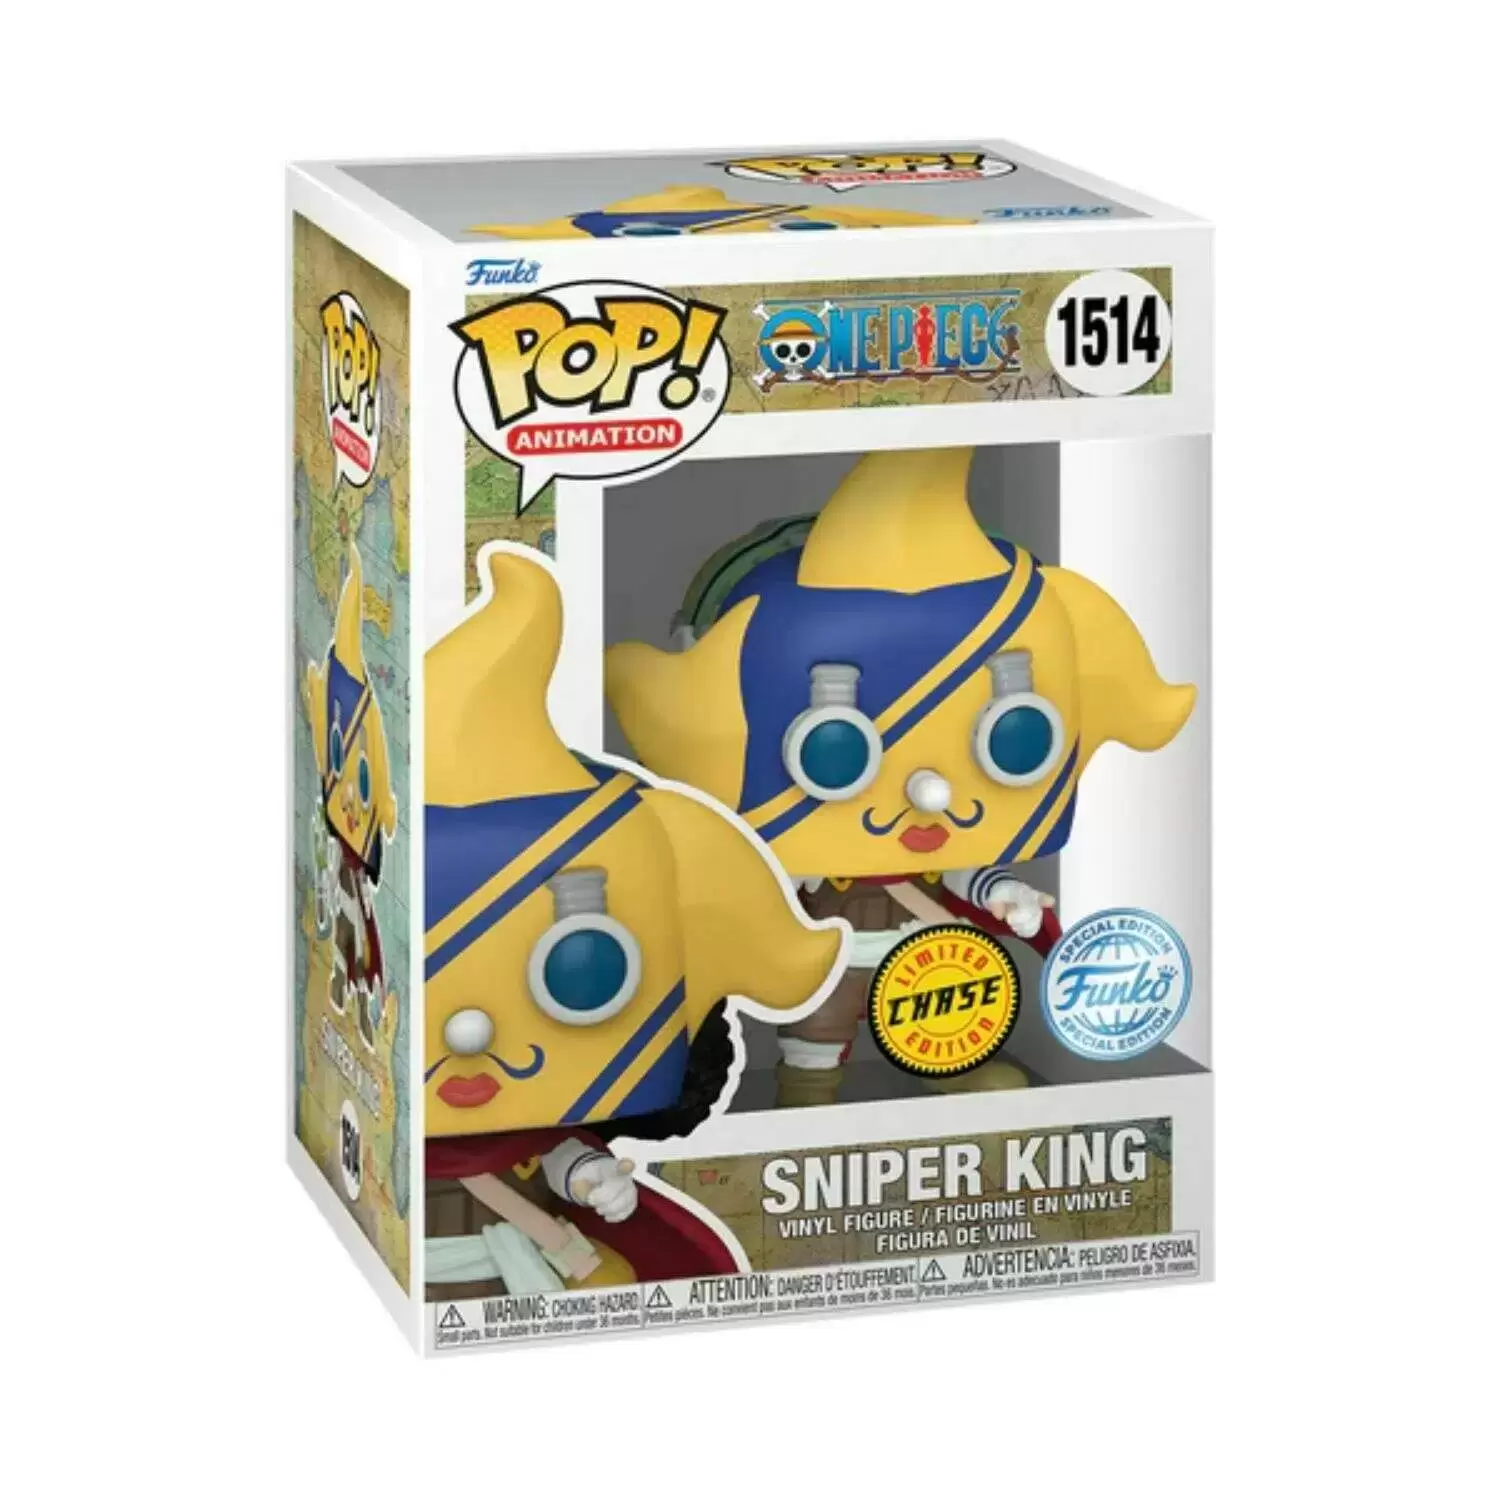 POP! Animation - One Piece - Sniper King Chase